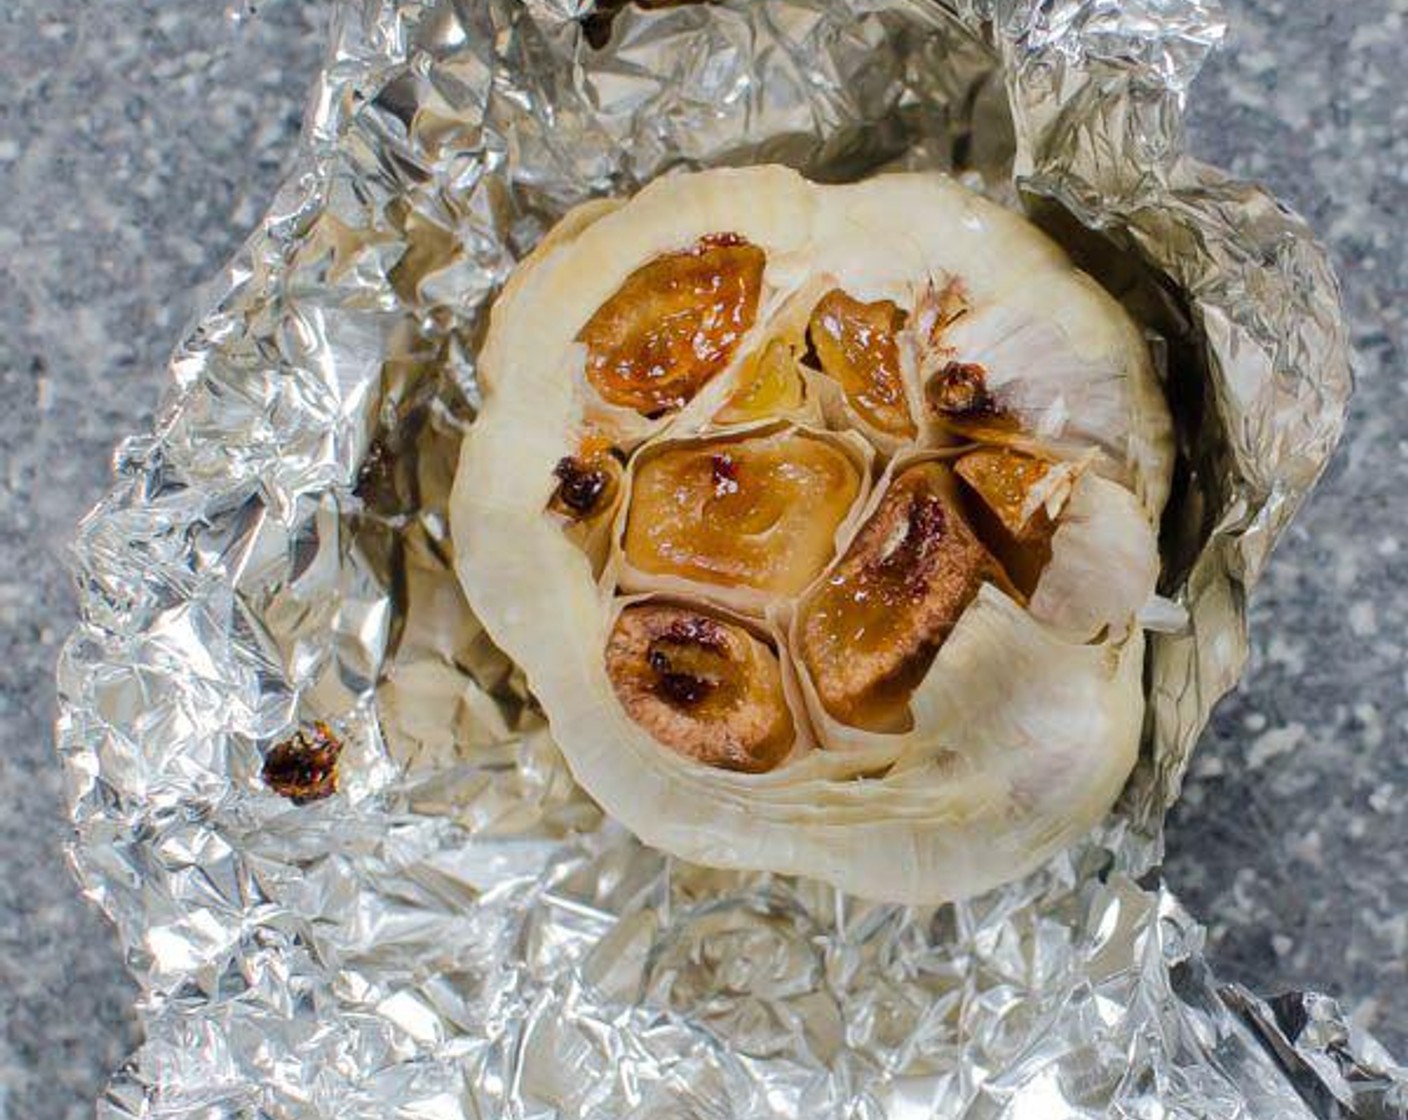 step 2 Slice about 1/4" from the Garlic (1 bulb) and drizzle Olive Oil (1 tsp) over the exposed cloves.  Wrap garlic in aluminum foil and roast for 40-50 minutes, until soft. Remove from oven and cool until you can handle it.